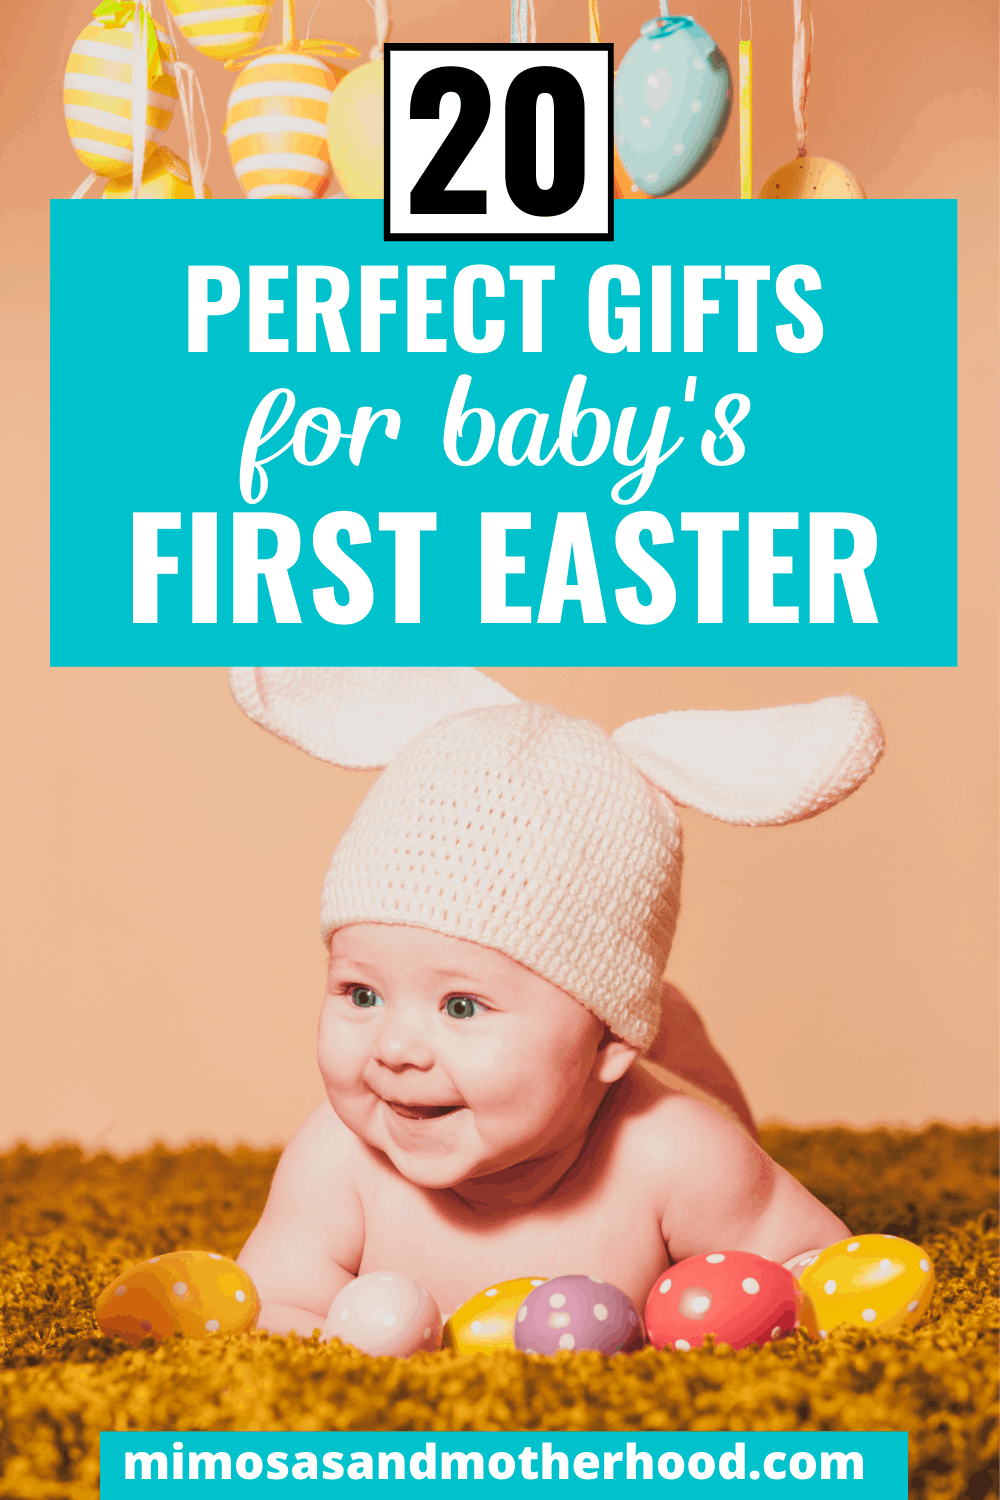 The Perfect Gifts for Baby’s First Easter